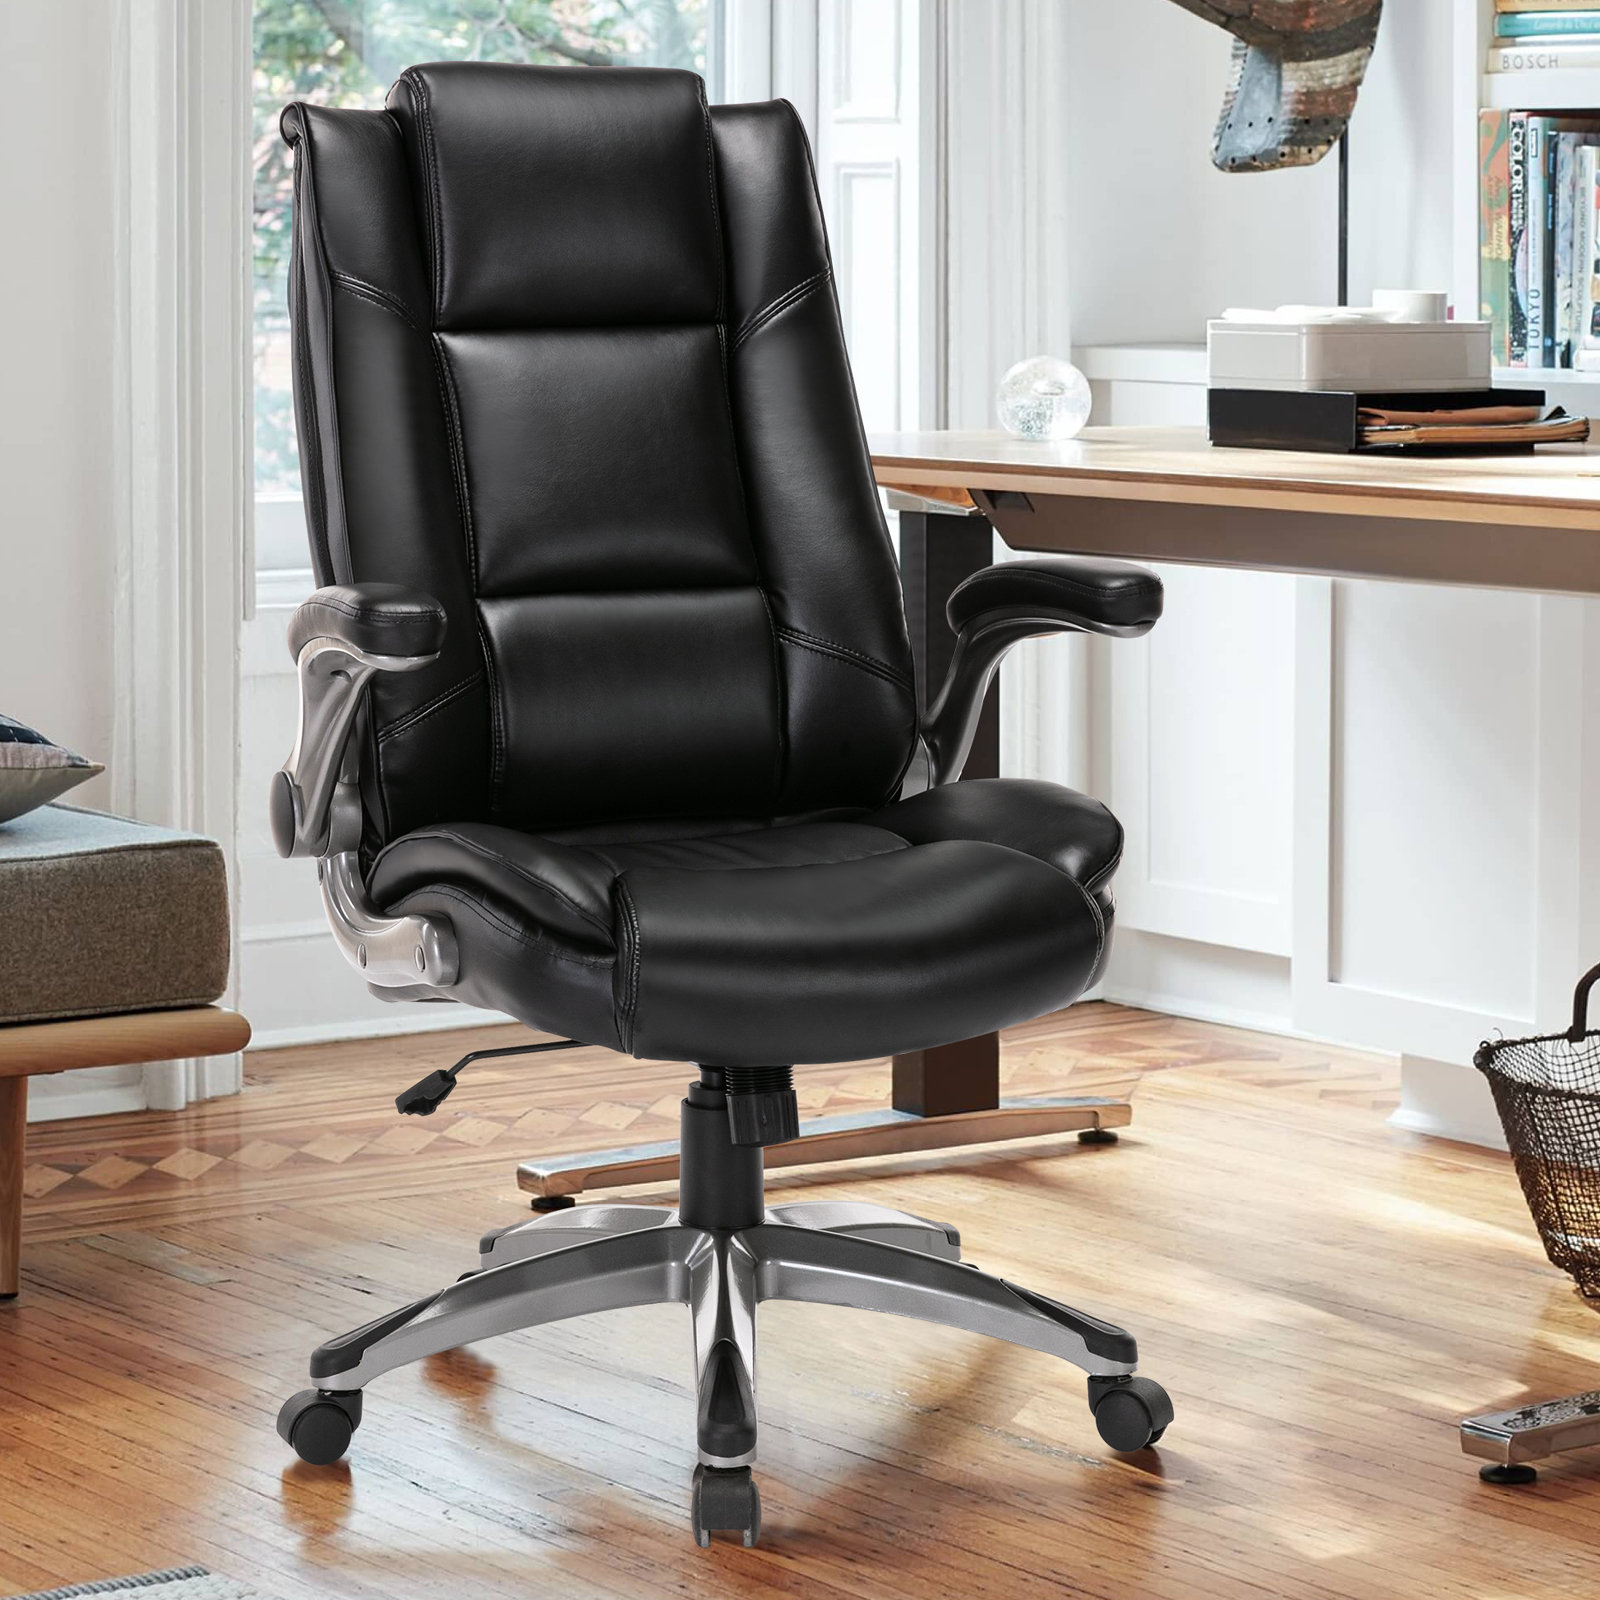 Marisol High Back Ergonomic Executive Chair The Twillery Co. Upholstery Color: Black